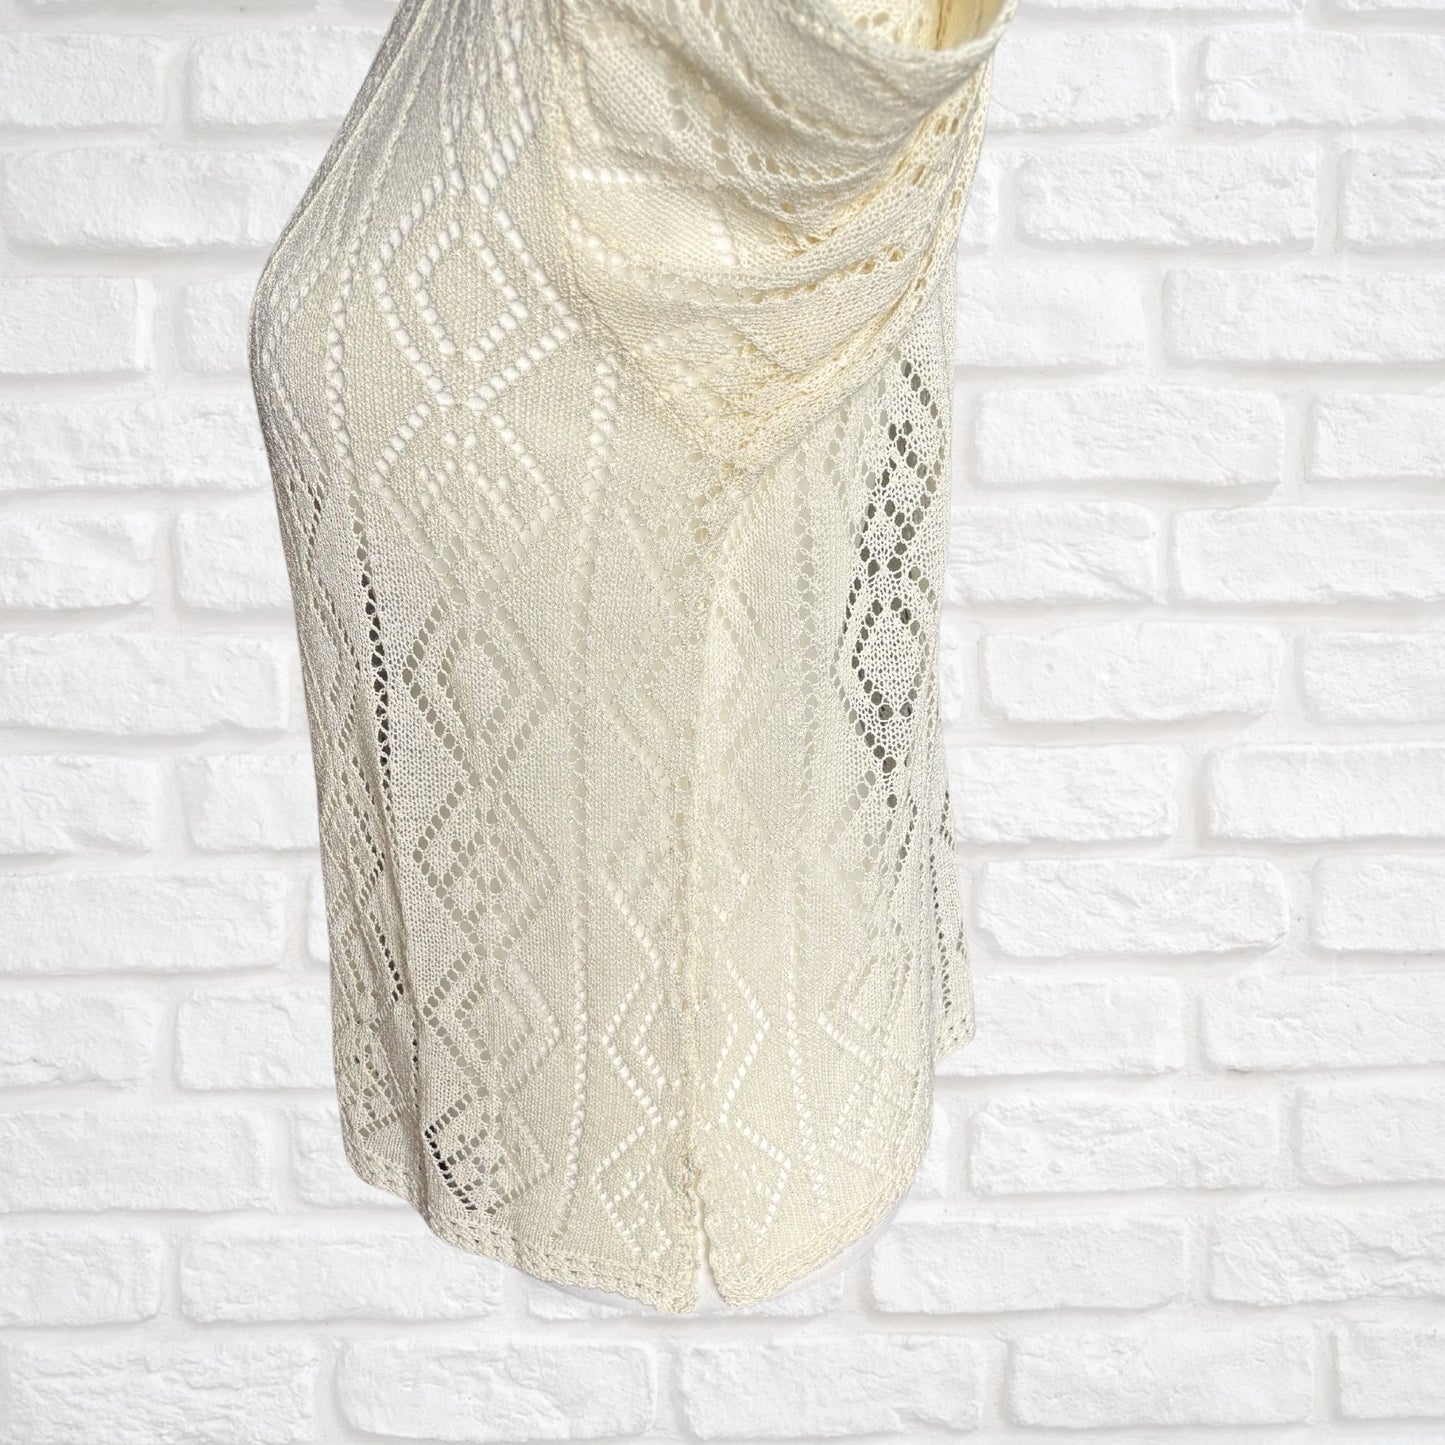 Vintage Pale Cream Crochet Cardigan: Pointelle Design with Daisy Detailing. Approx UK size 14-18